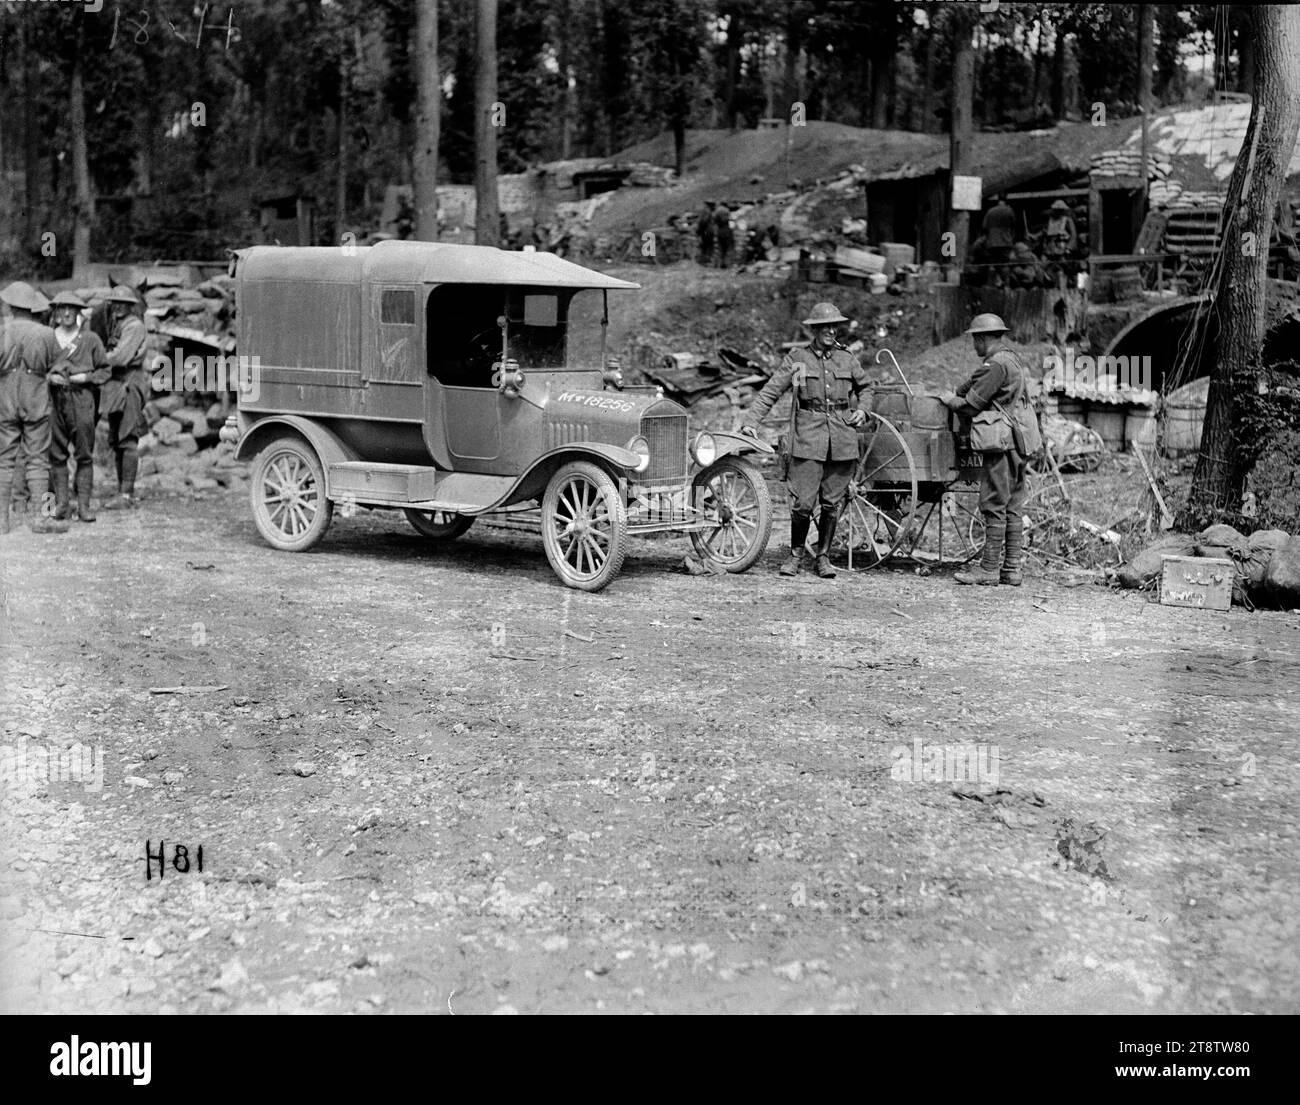 The official photographer's car in Ploegsteert Wood, World War I, The car used by the official New Zealand World War I photographer, Henry Sanders, parked at the heavily fortified New Zealand camp in Ploegsteert Wood, Belgium. The car has a fern leaf emblem on its side. In the background, the entrances to a number of dugouts can be seen. Photograph taken during World War I Stock Photo